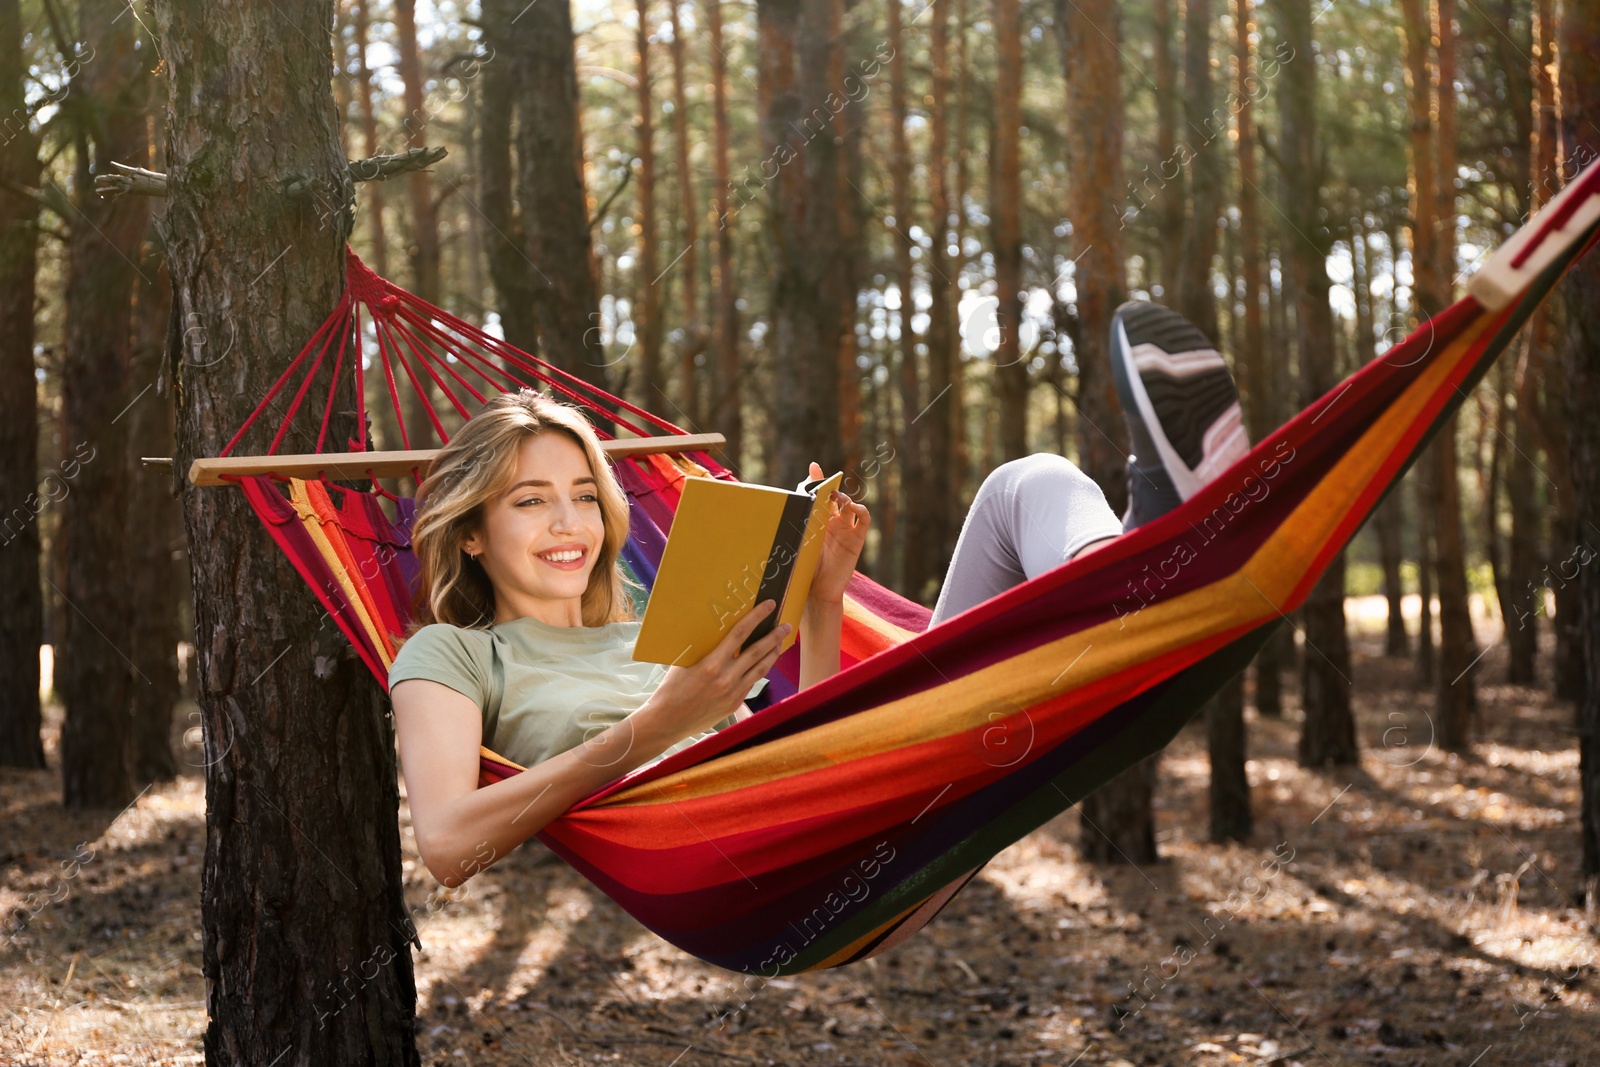 Photo of Woman with book relaxing in hammock outdoors on summer day